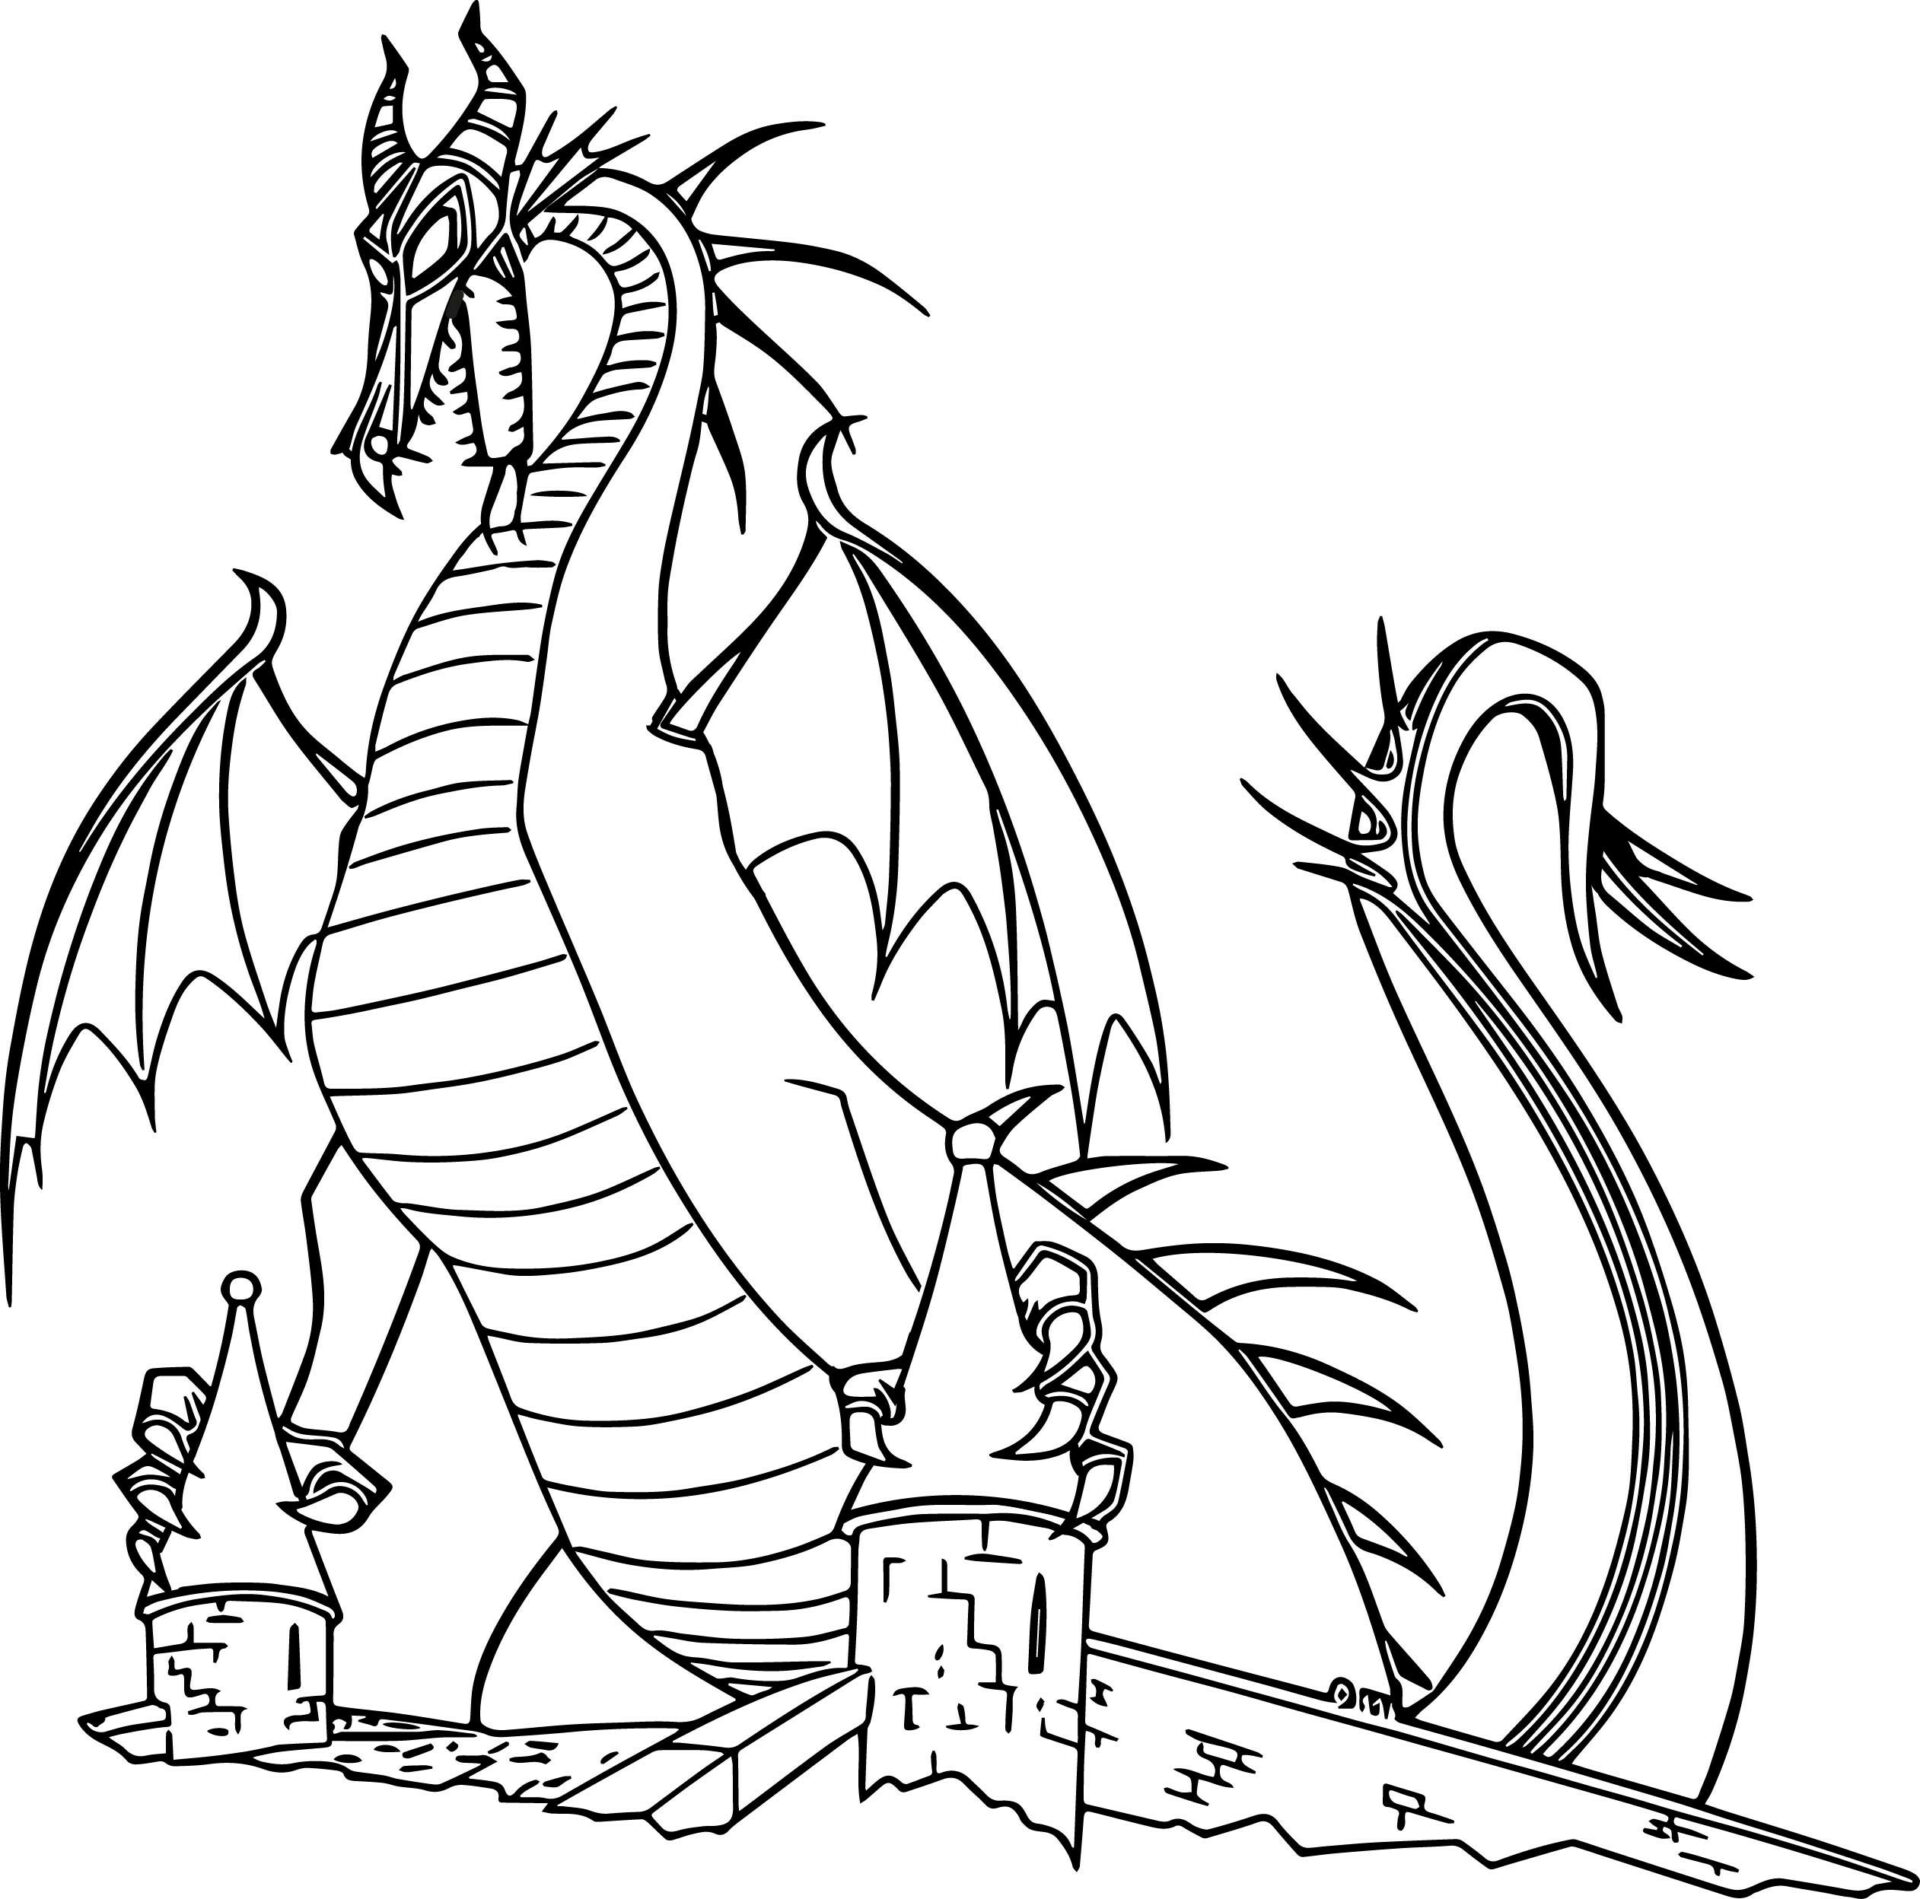 Sleeping Beauty Dragon Coloring Page Free Printable Coloring Pages For Kids